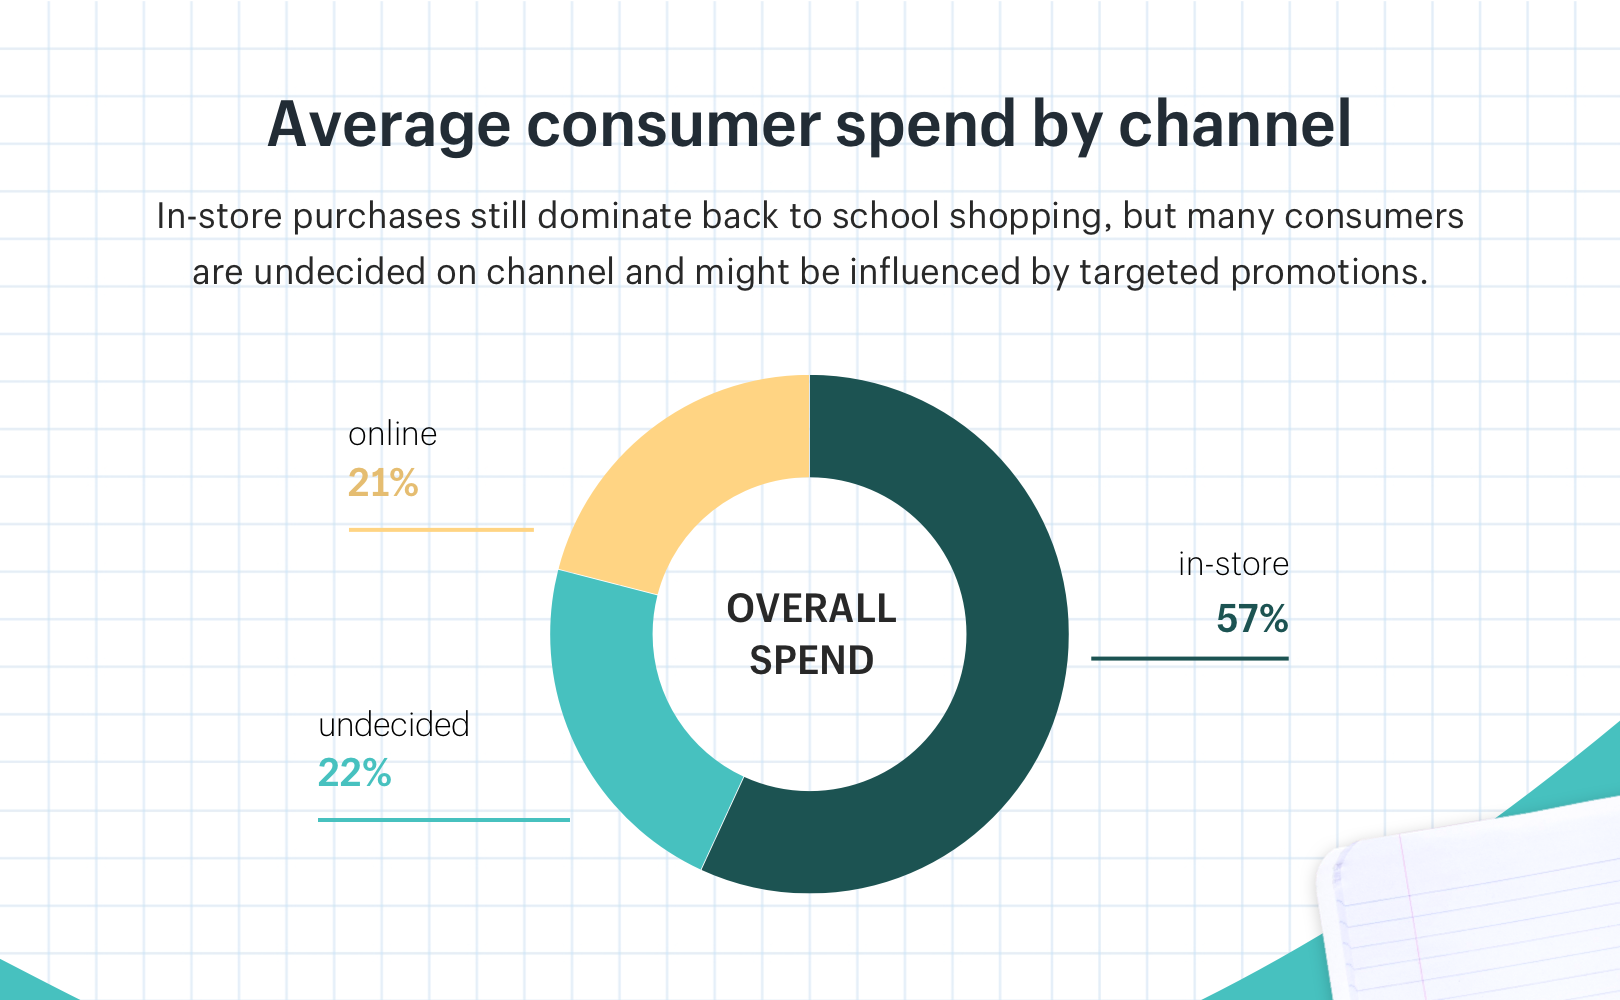 Average spend per channel for back-to-school shoppers